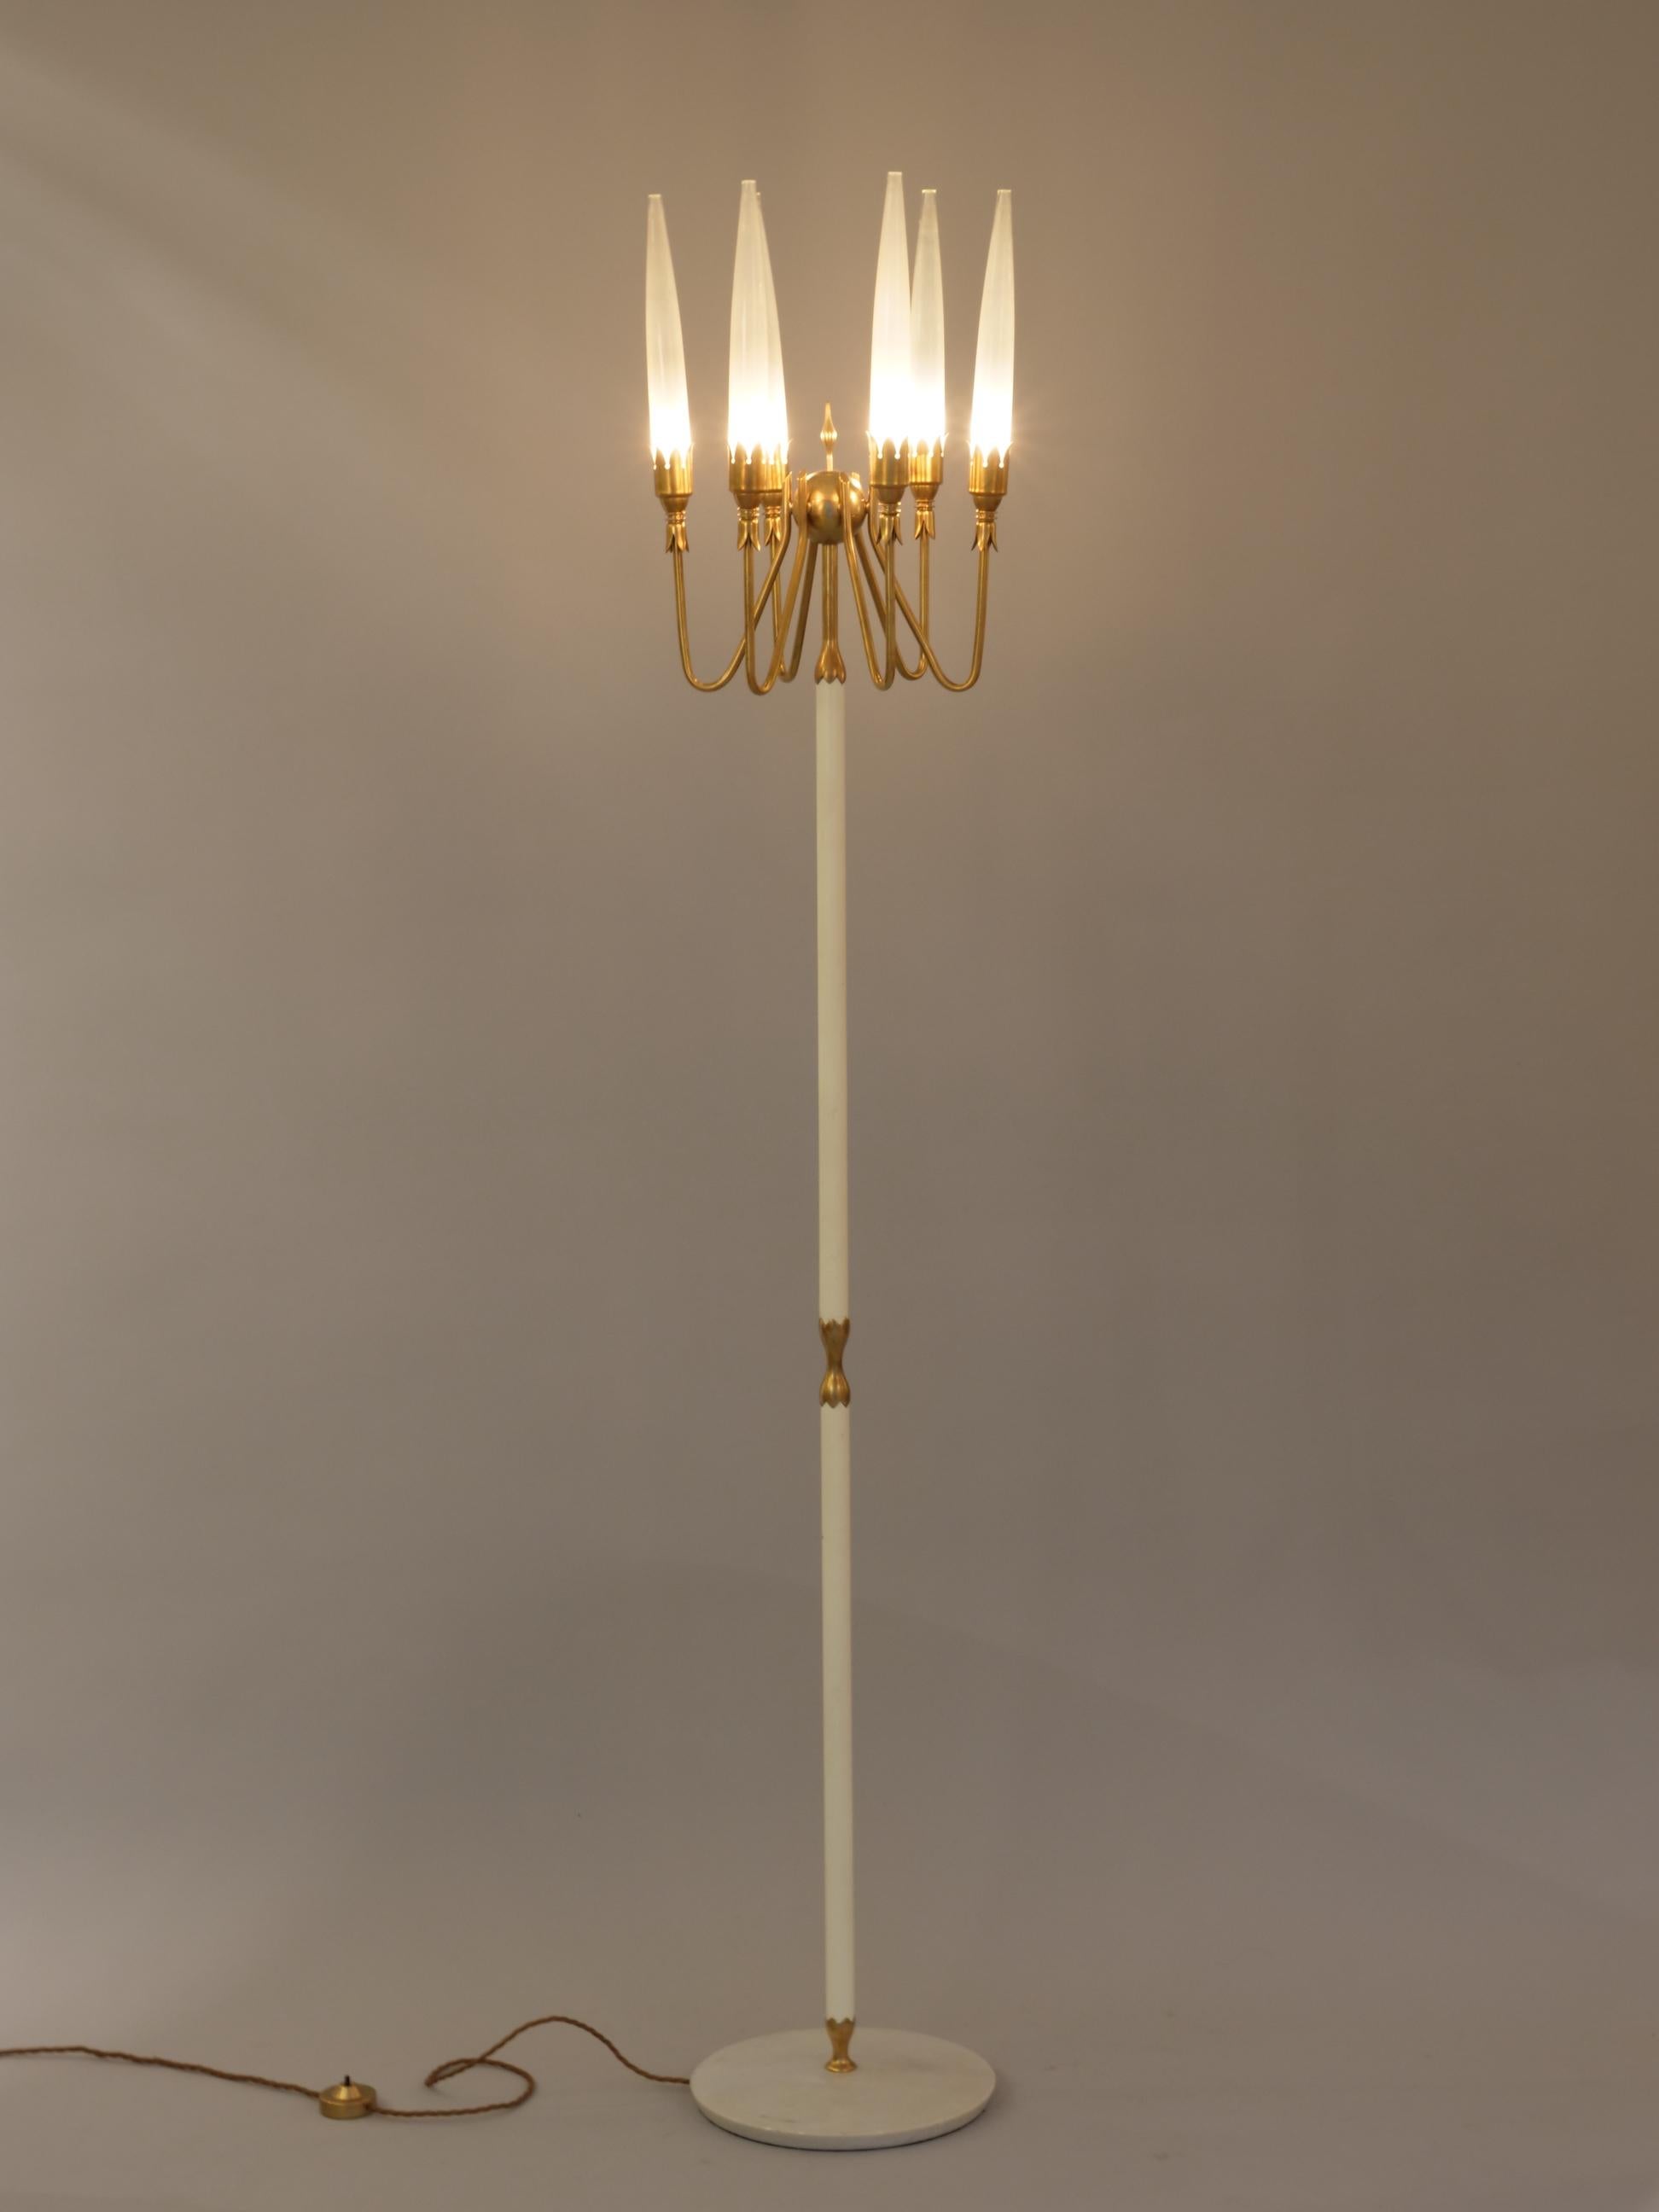 Elegant floor lamp by Angelo Leli for Arredoluce. circa 1954.

Six opalescent shades. Brass, painted metal and marble base. 

Brass floor switch, 